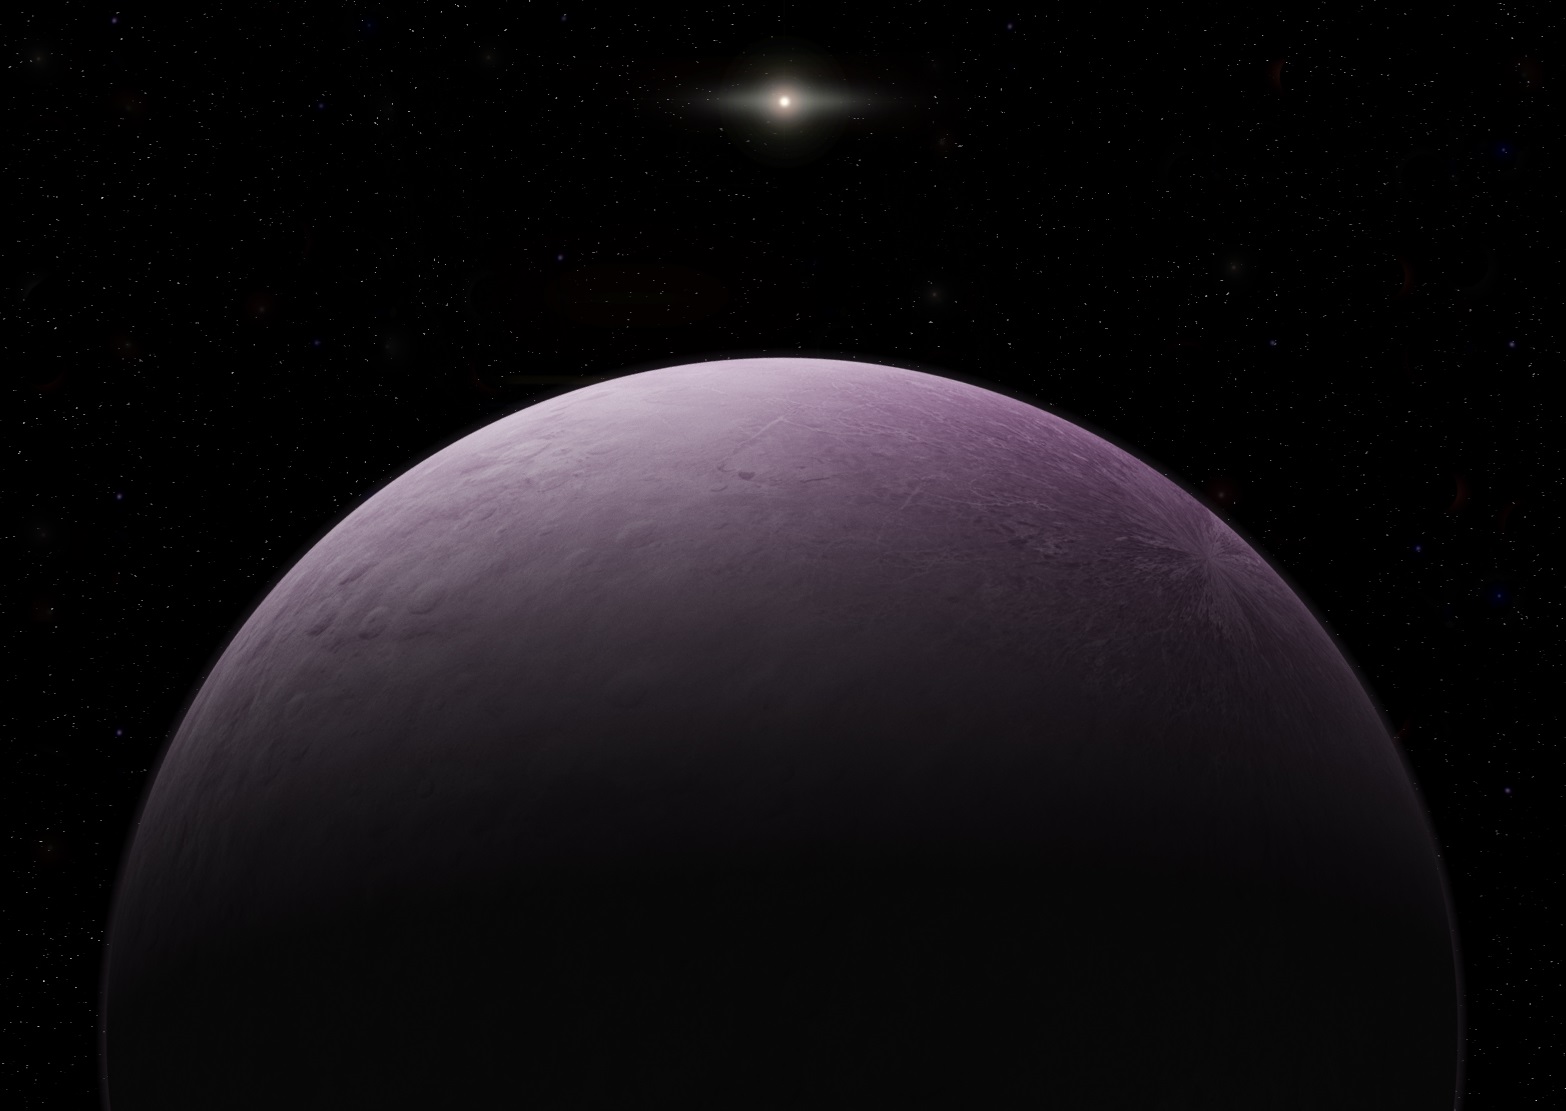 Discovered The Most Distant Solar System Object Ever Observed